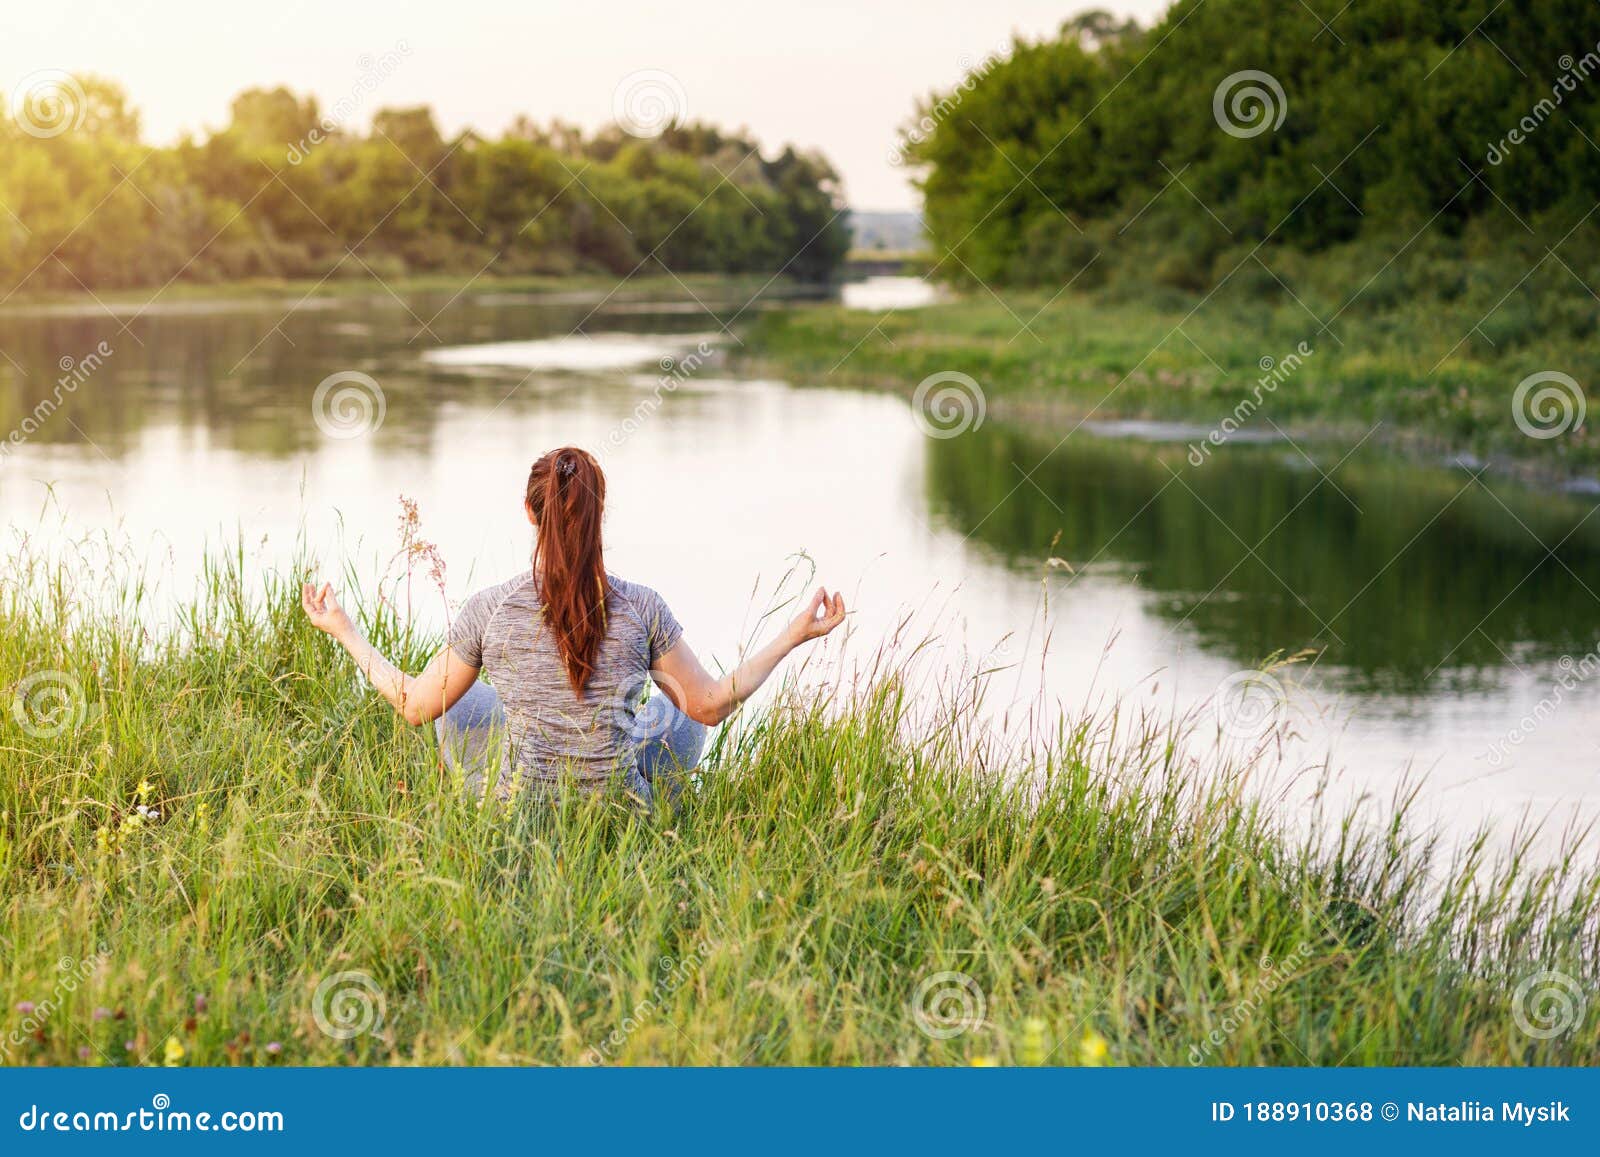 Concept of Recovery and Relaxation in Nature Stock Photo - Image of